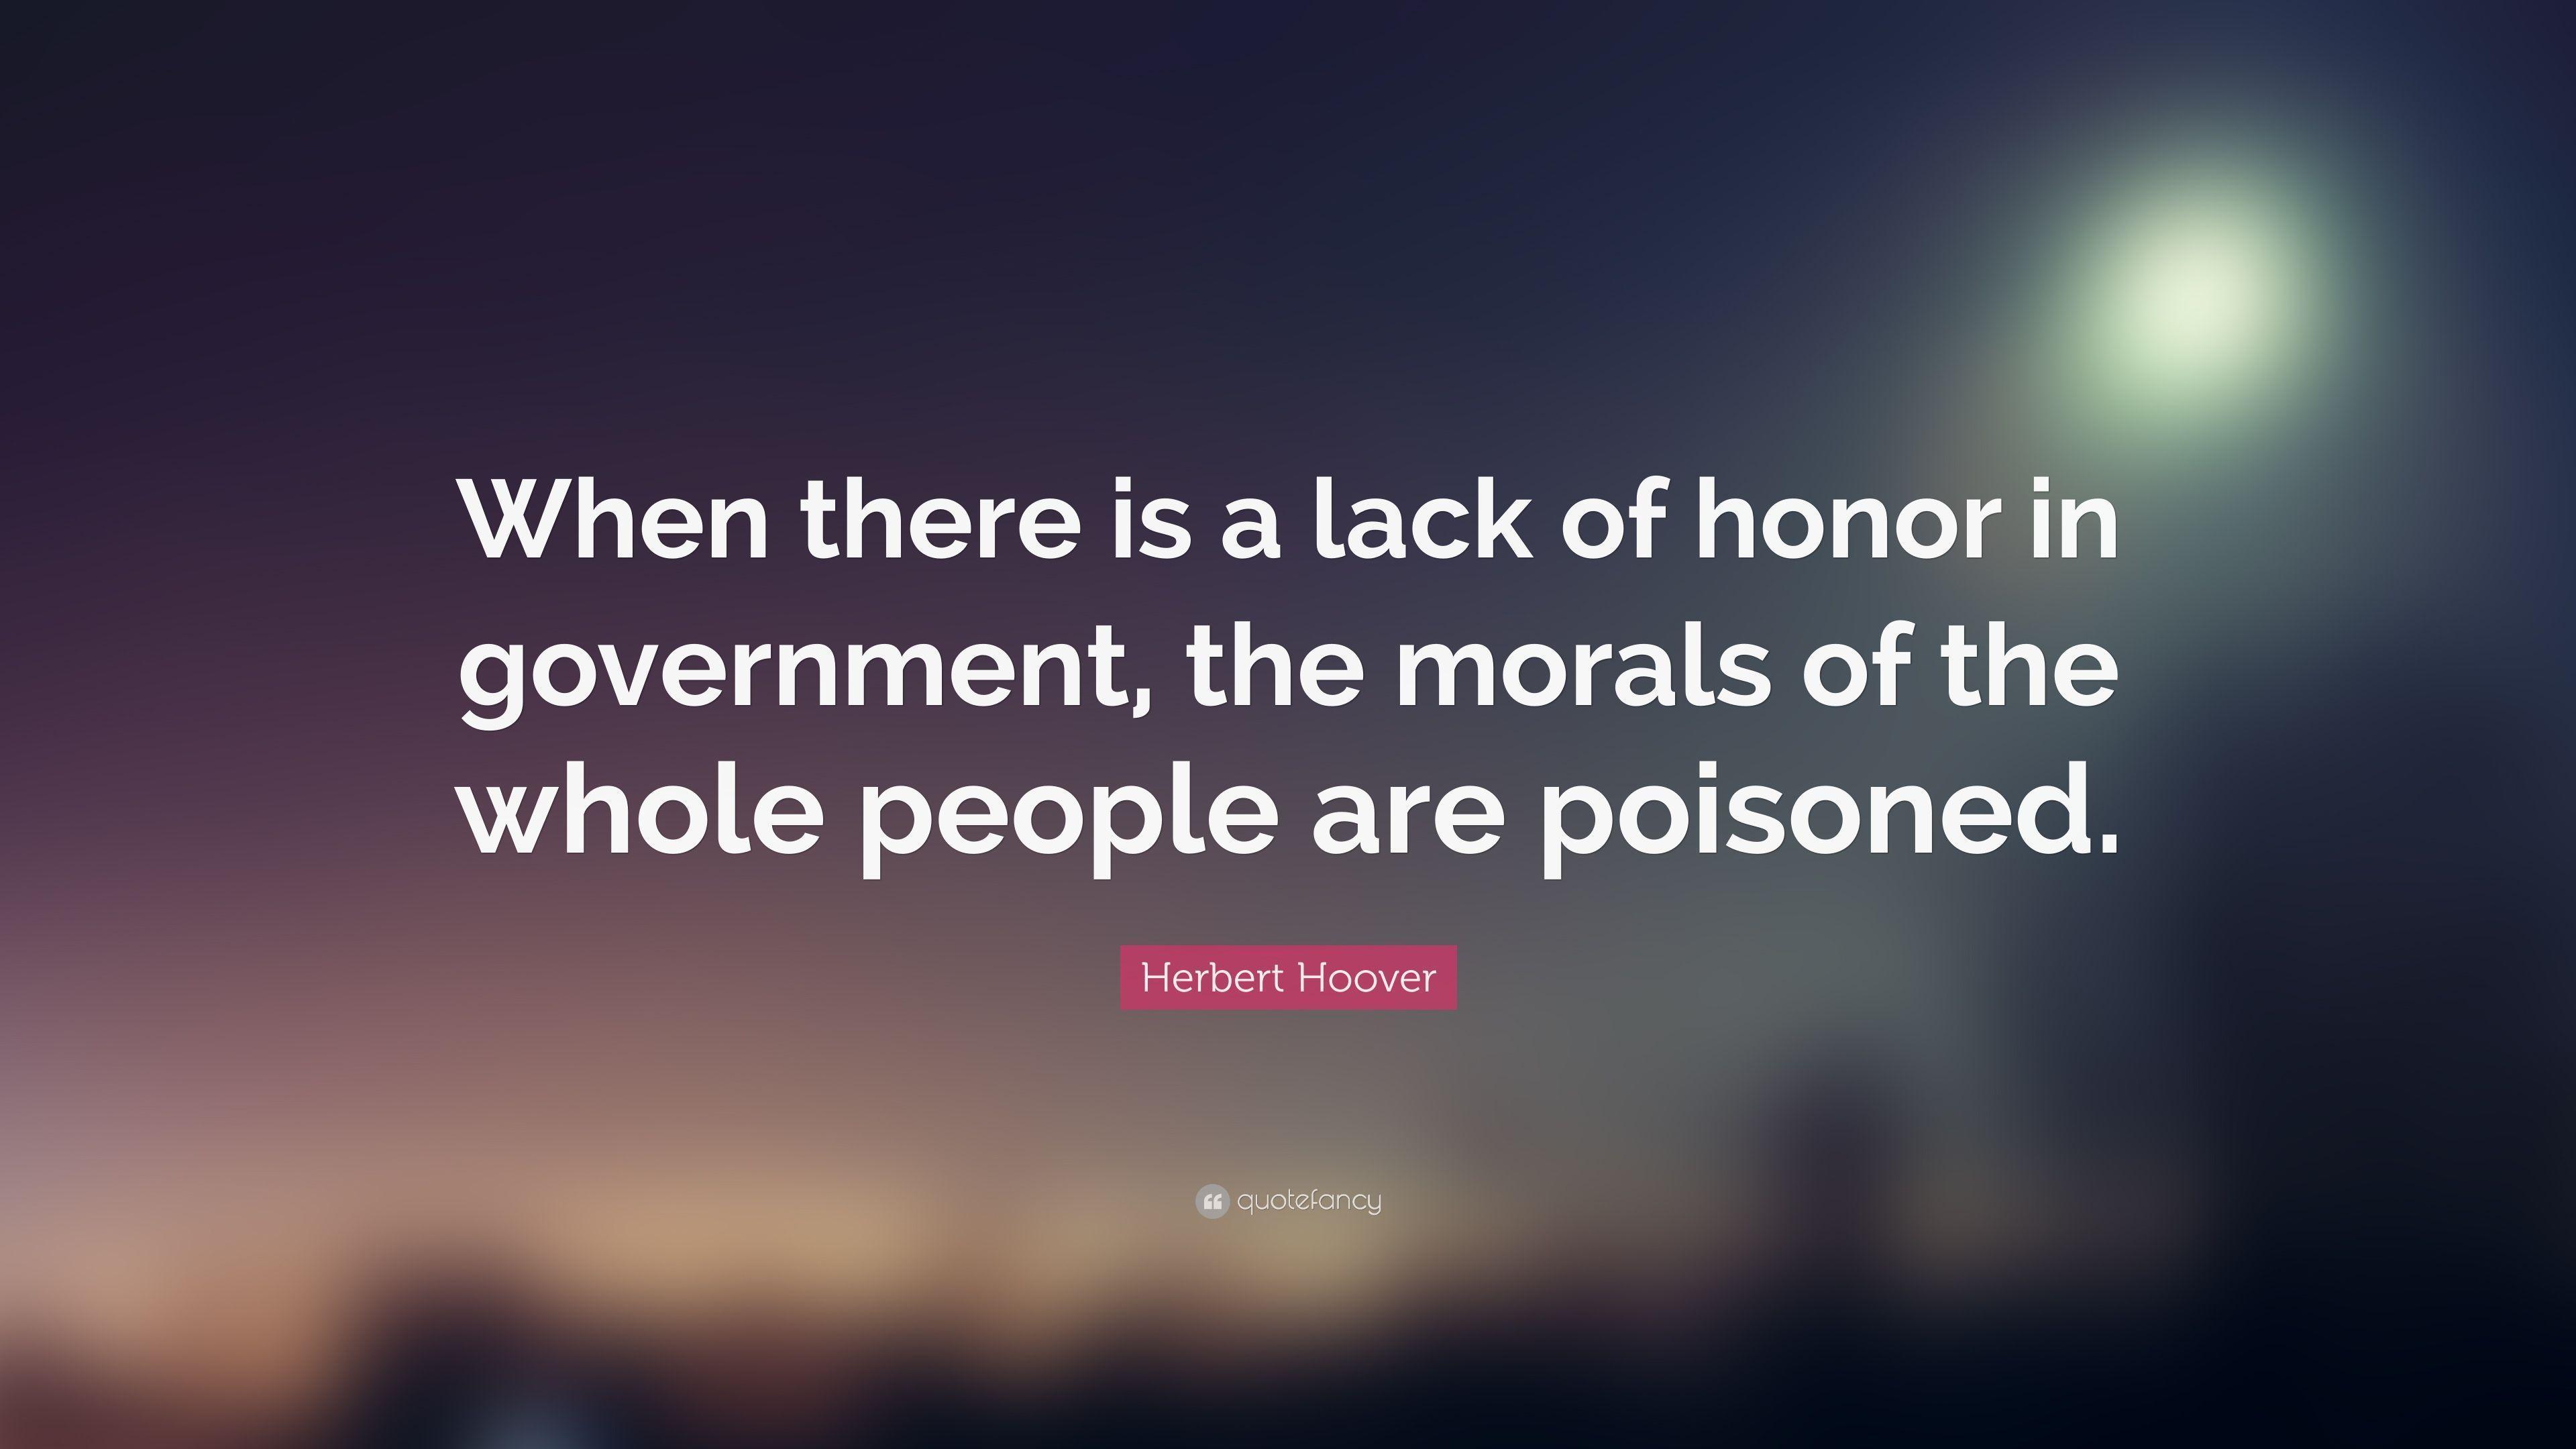 Herbert Hoover Quote: “When there is a lack of honor in government